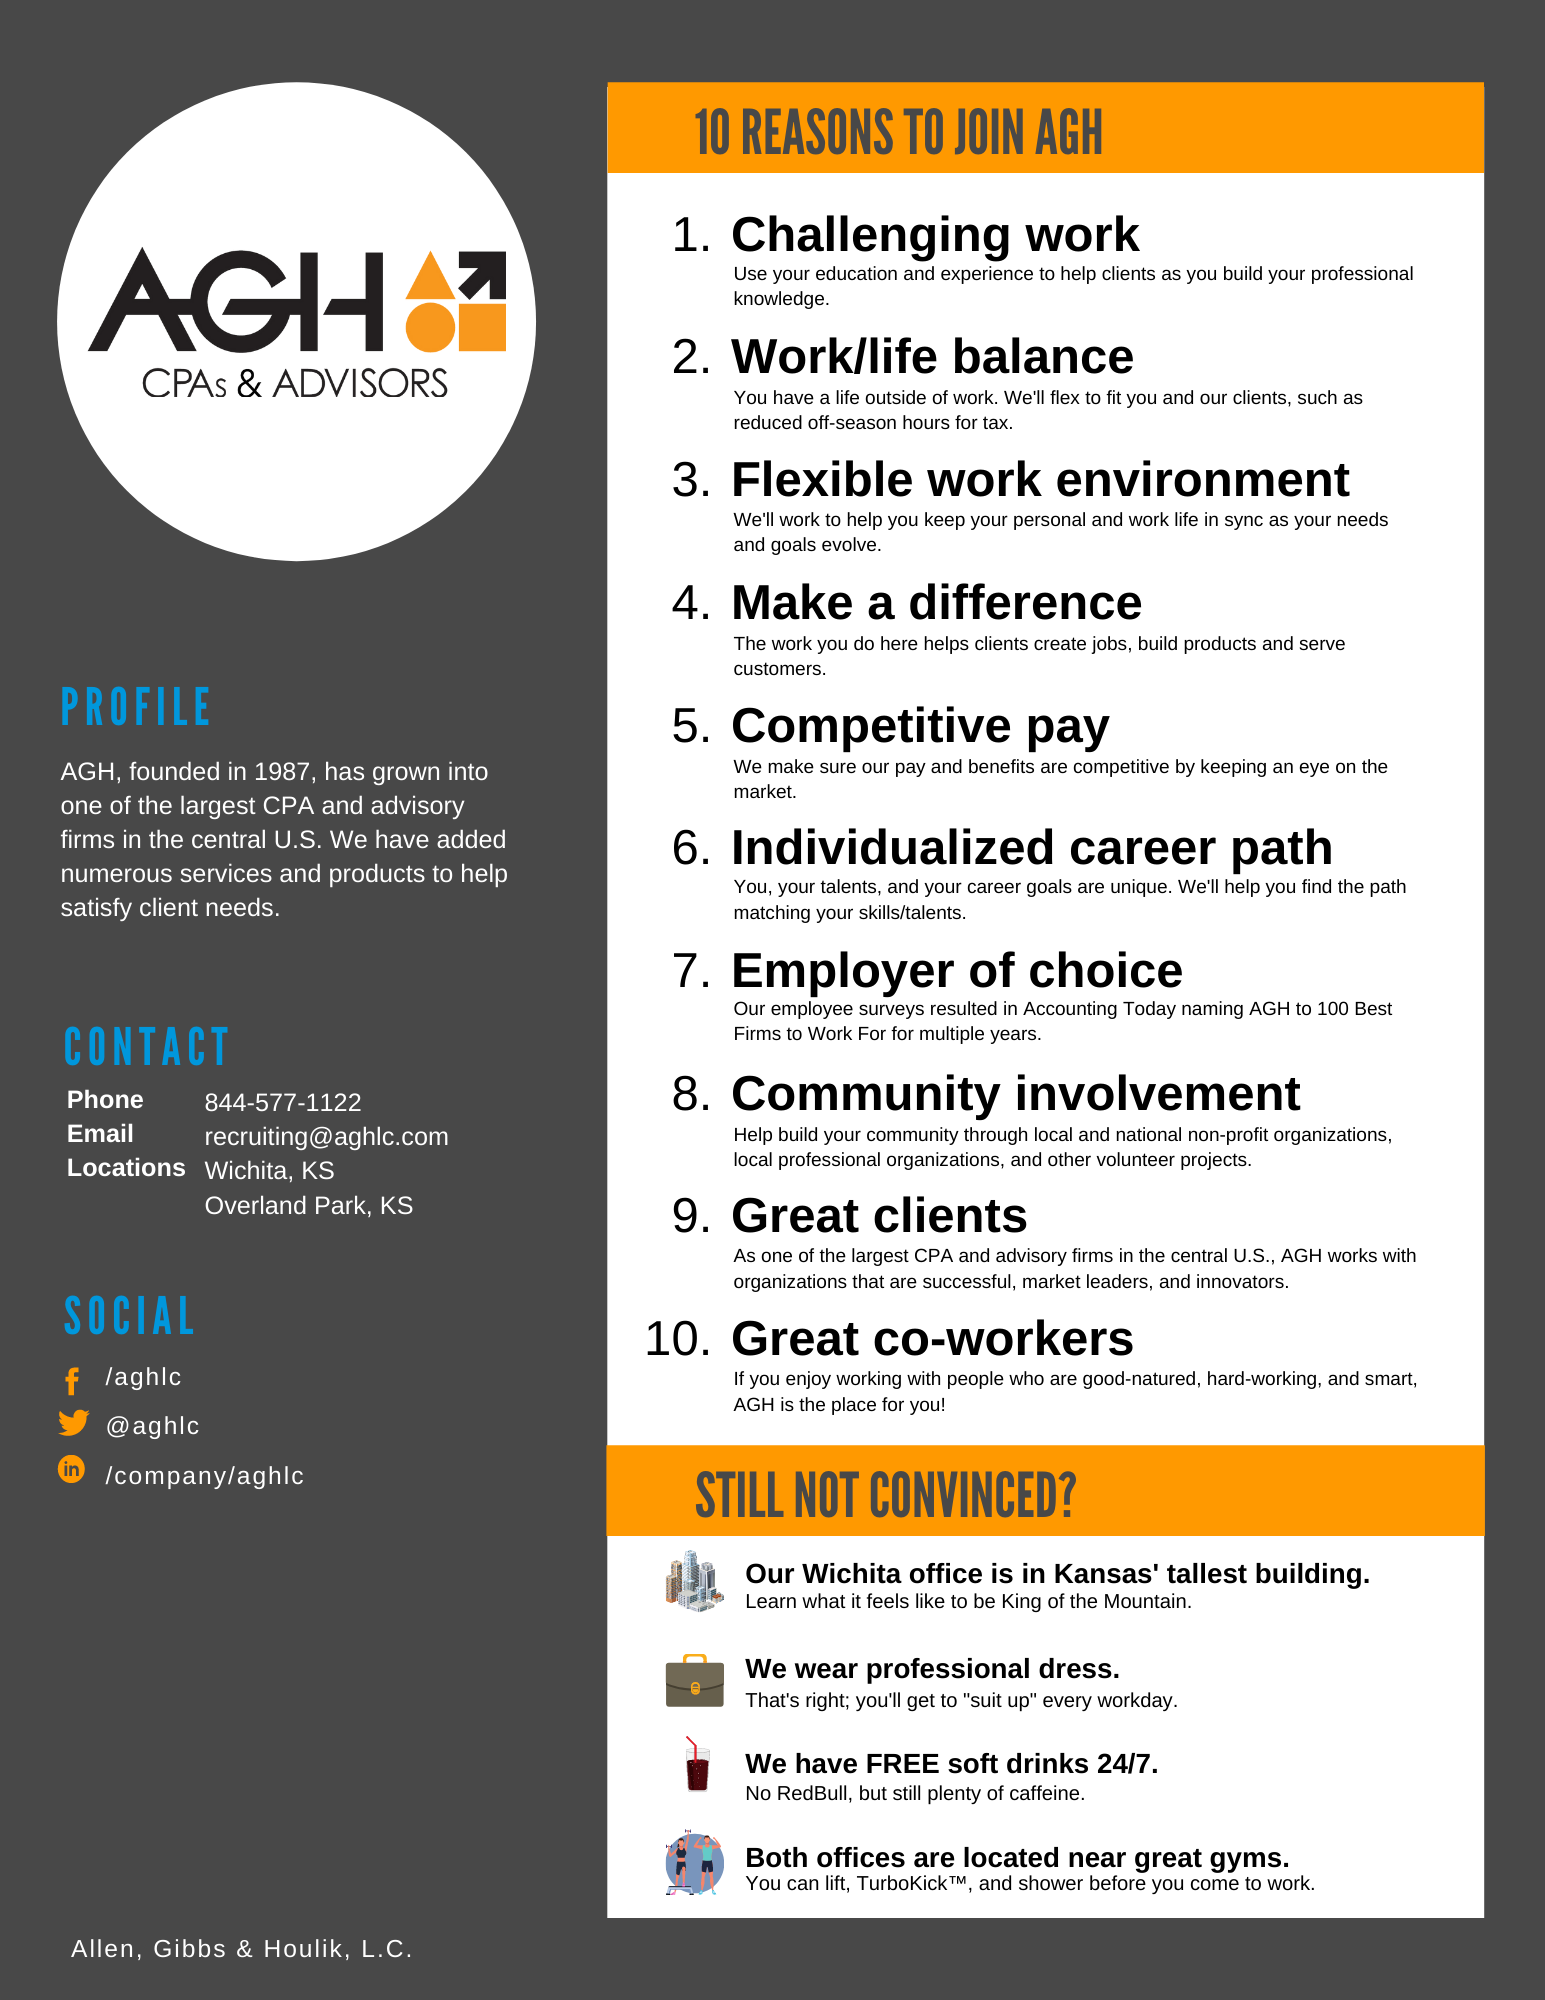 Top 10 reasons to work at AGH infographic